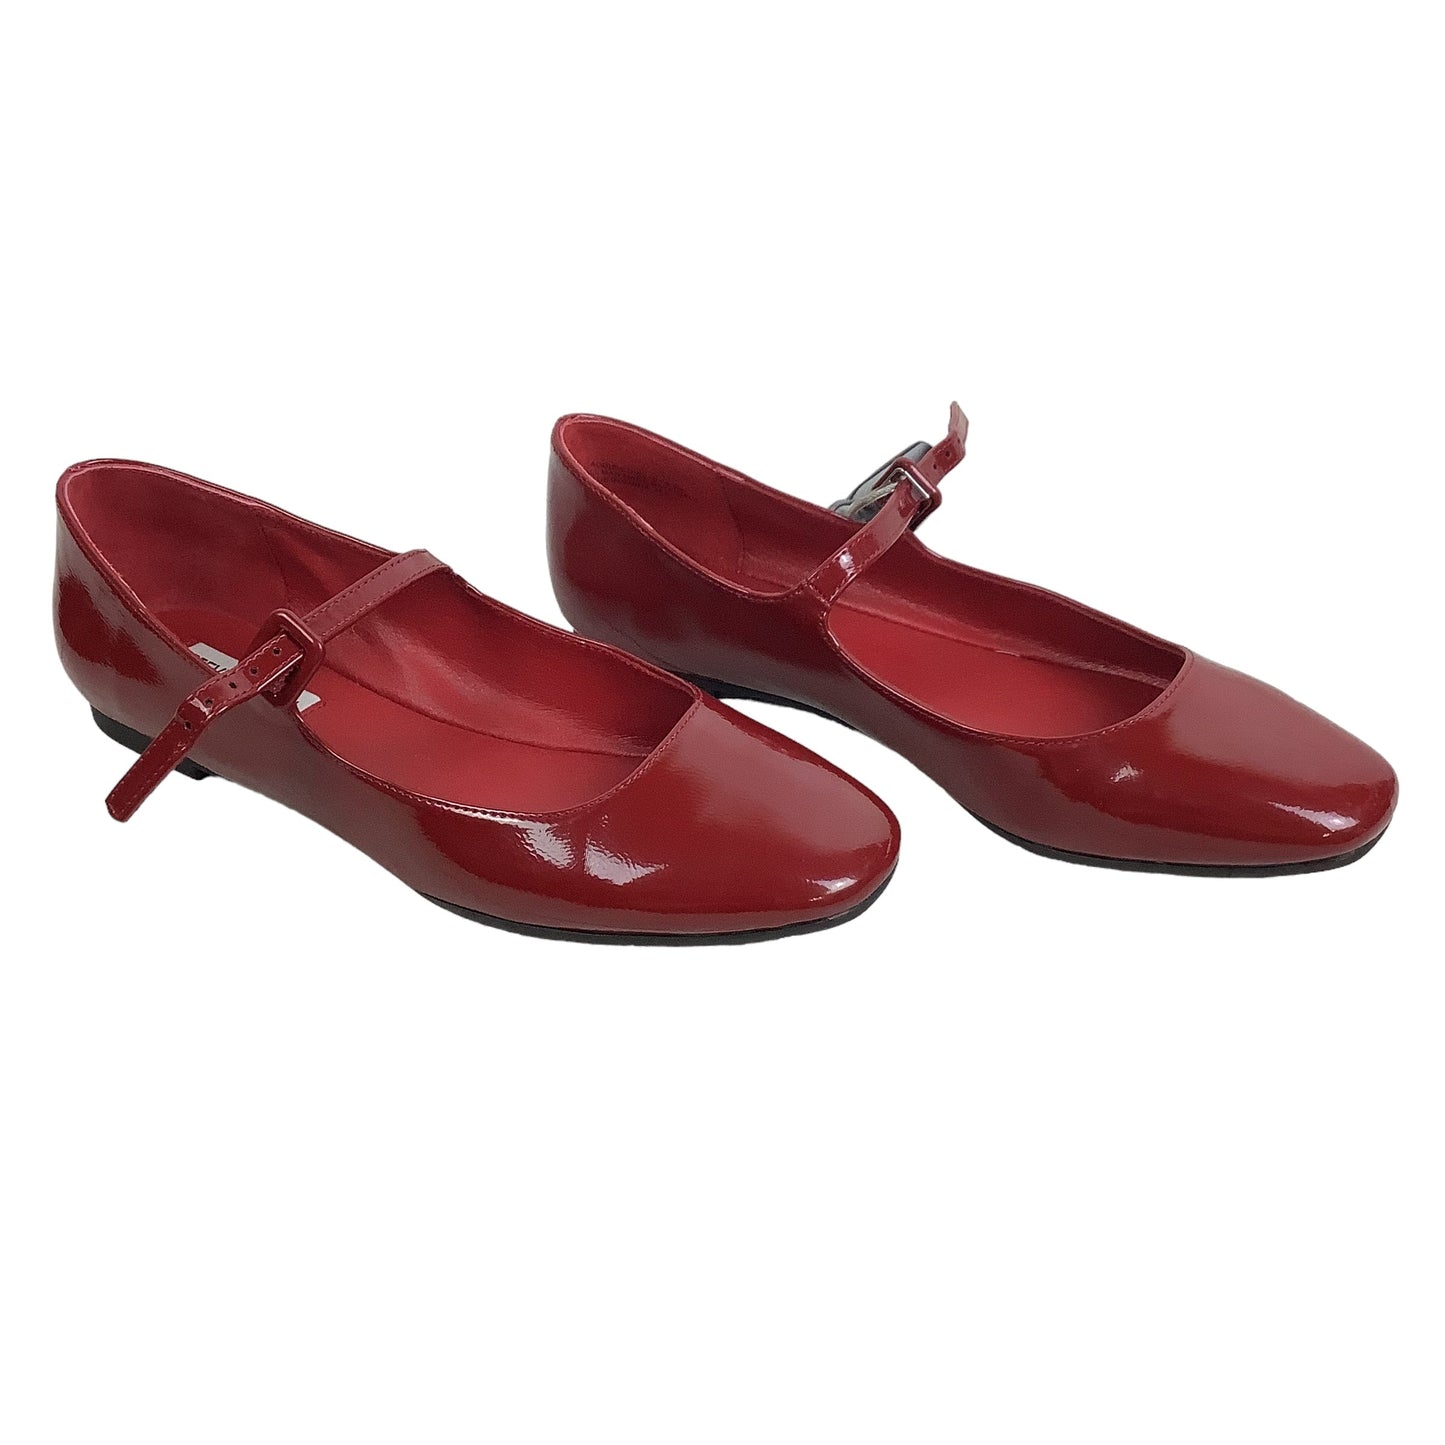 Red Shoes Flats Steve Madden, Size 10.5